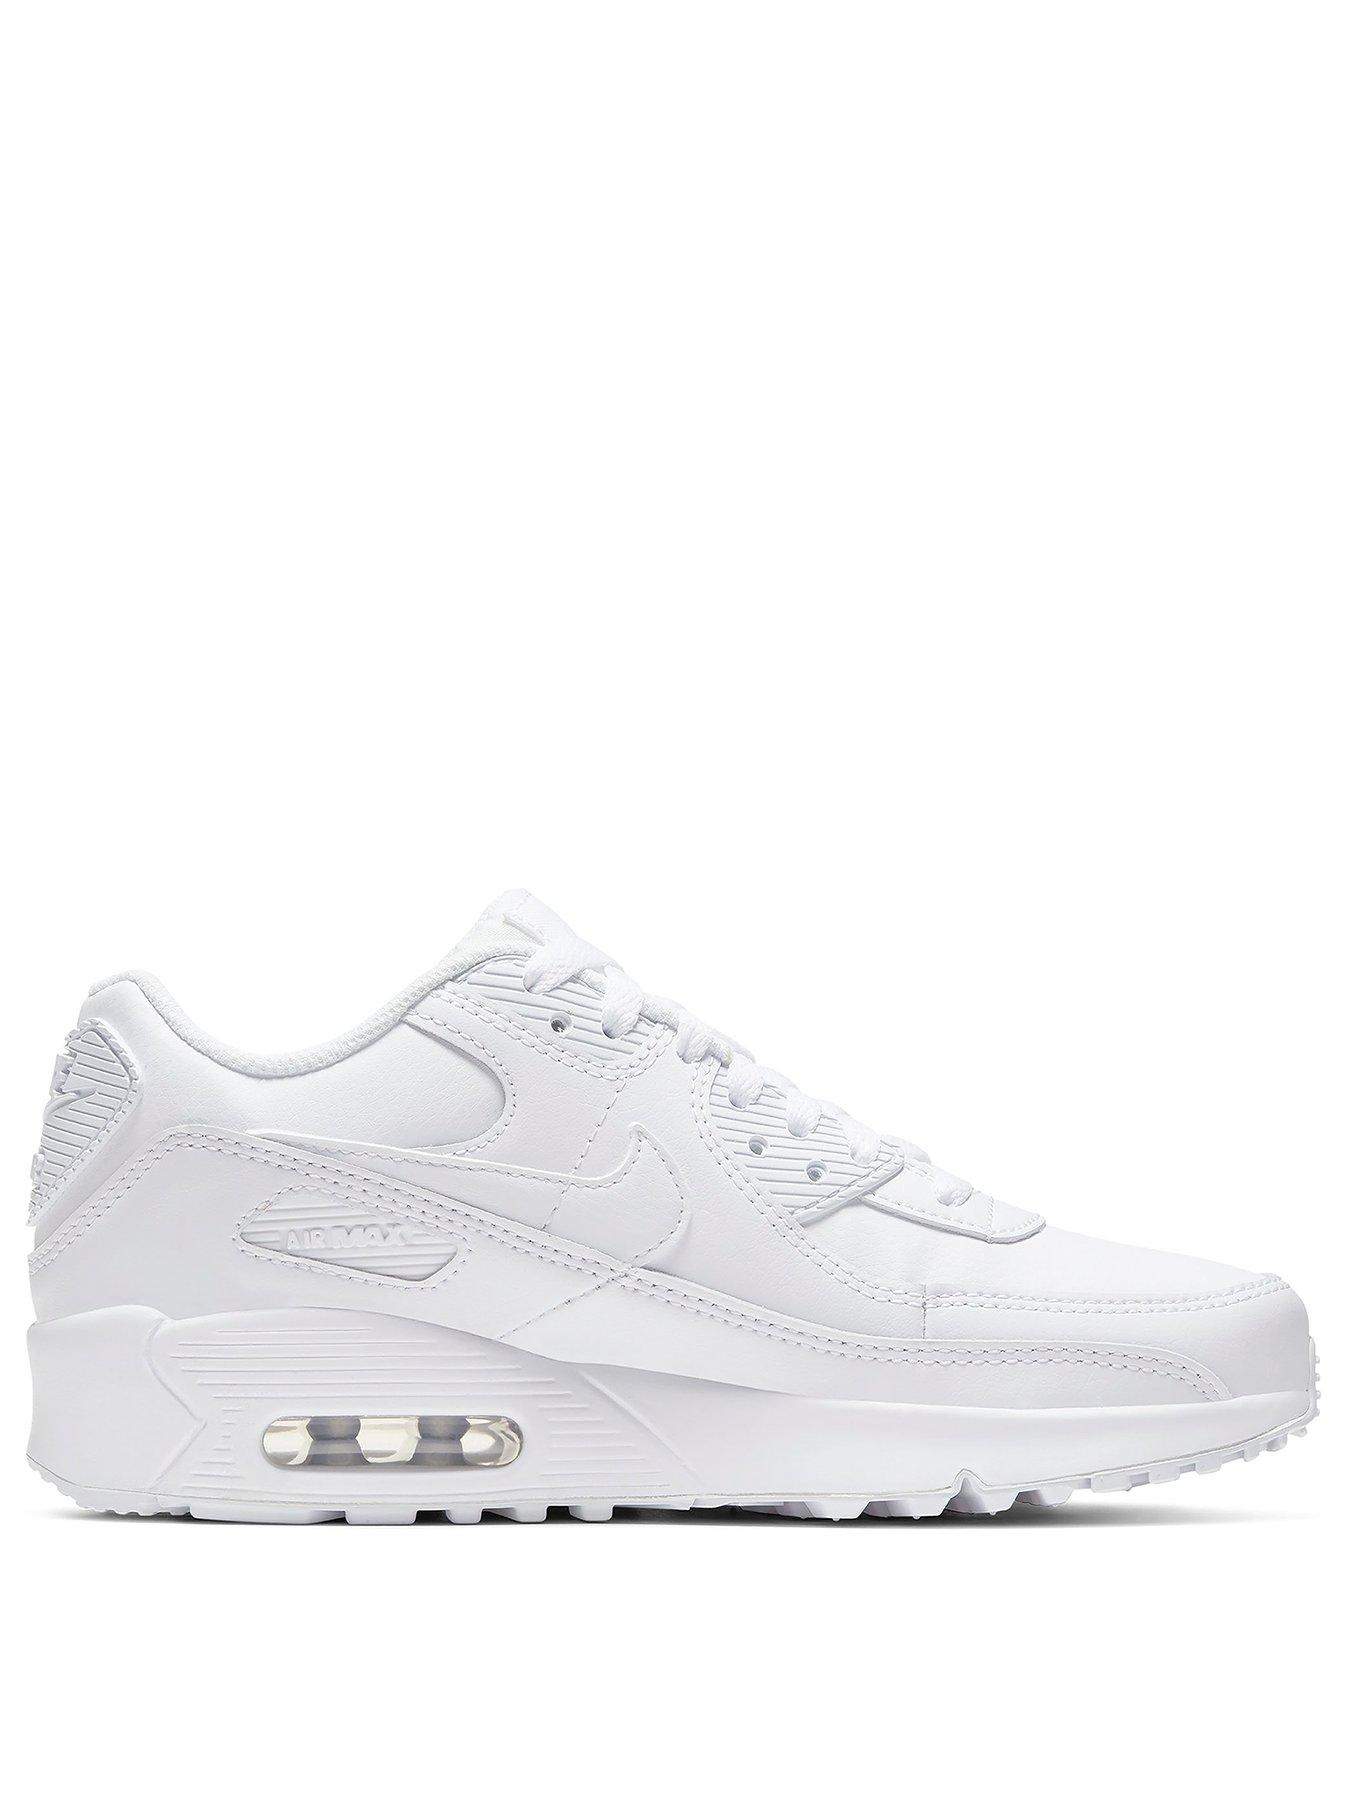 Nike Air Max 90 Leather Junior Trainers - White | very.co.uk